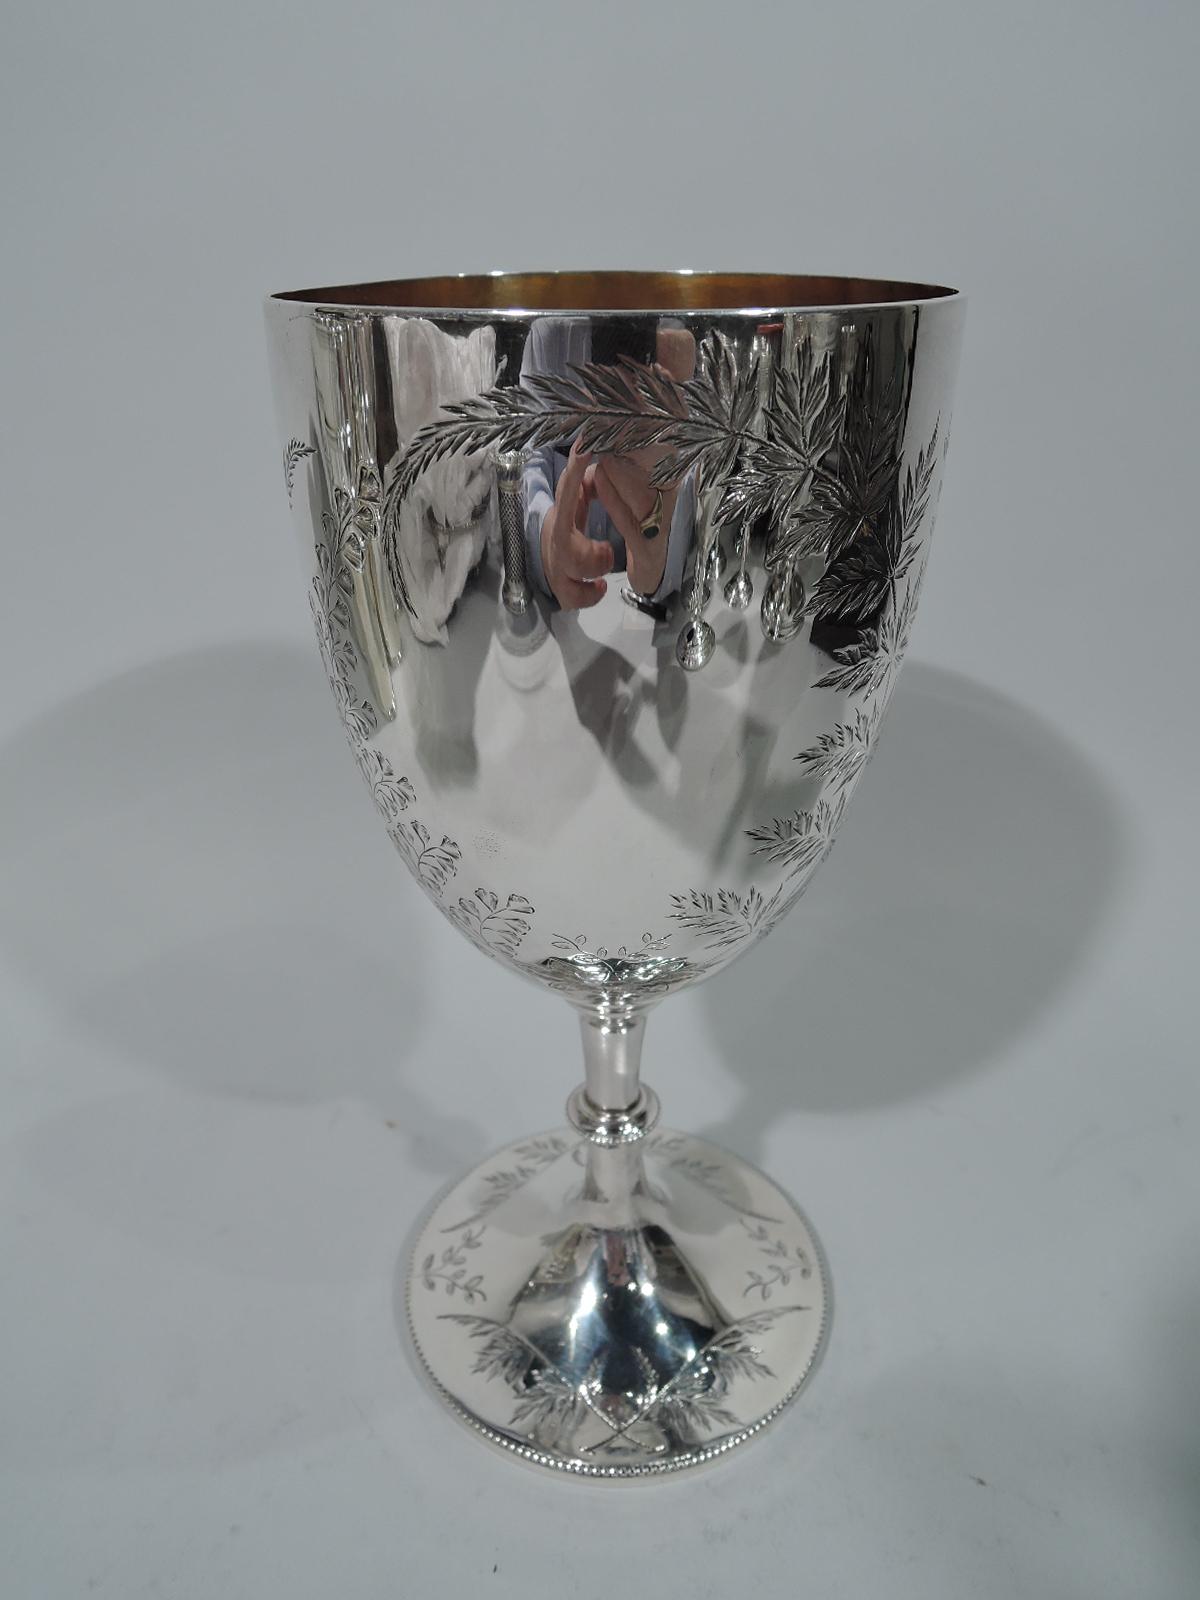 Victorian sterling silver goblet with engraved foliage. Made by Henry Holland in London in 1877. Curved and tapering bowl on cylindrical stem with beaded knop and raised foot. Bowl exteriro has engraved foliage including sweeping branches forming